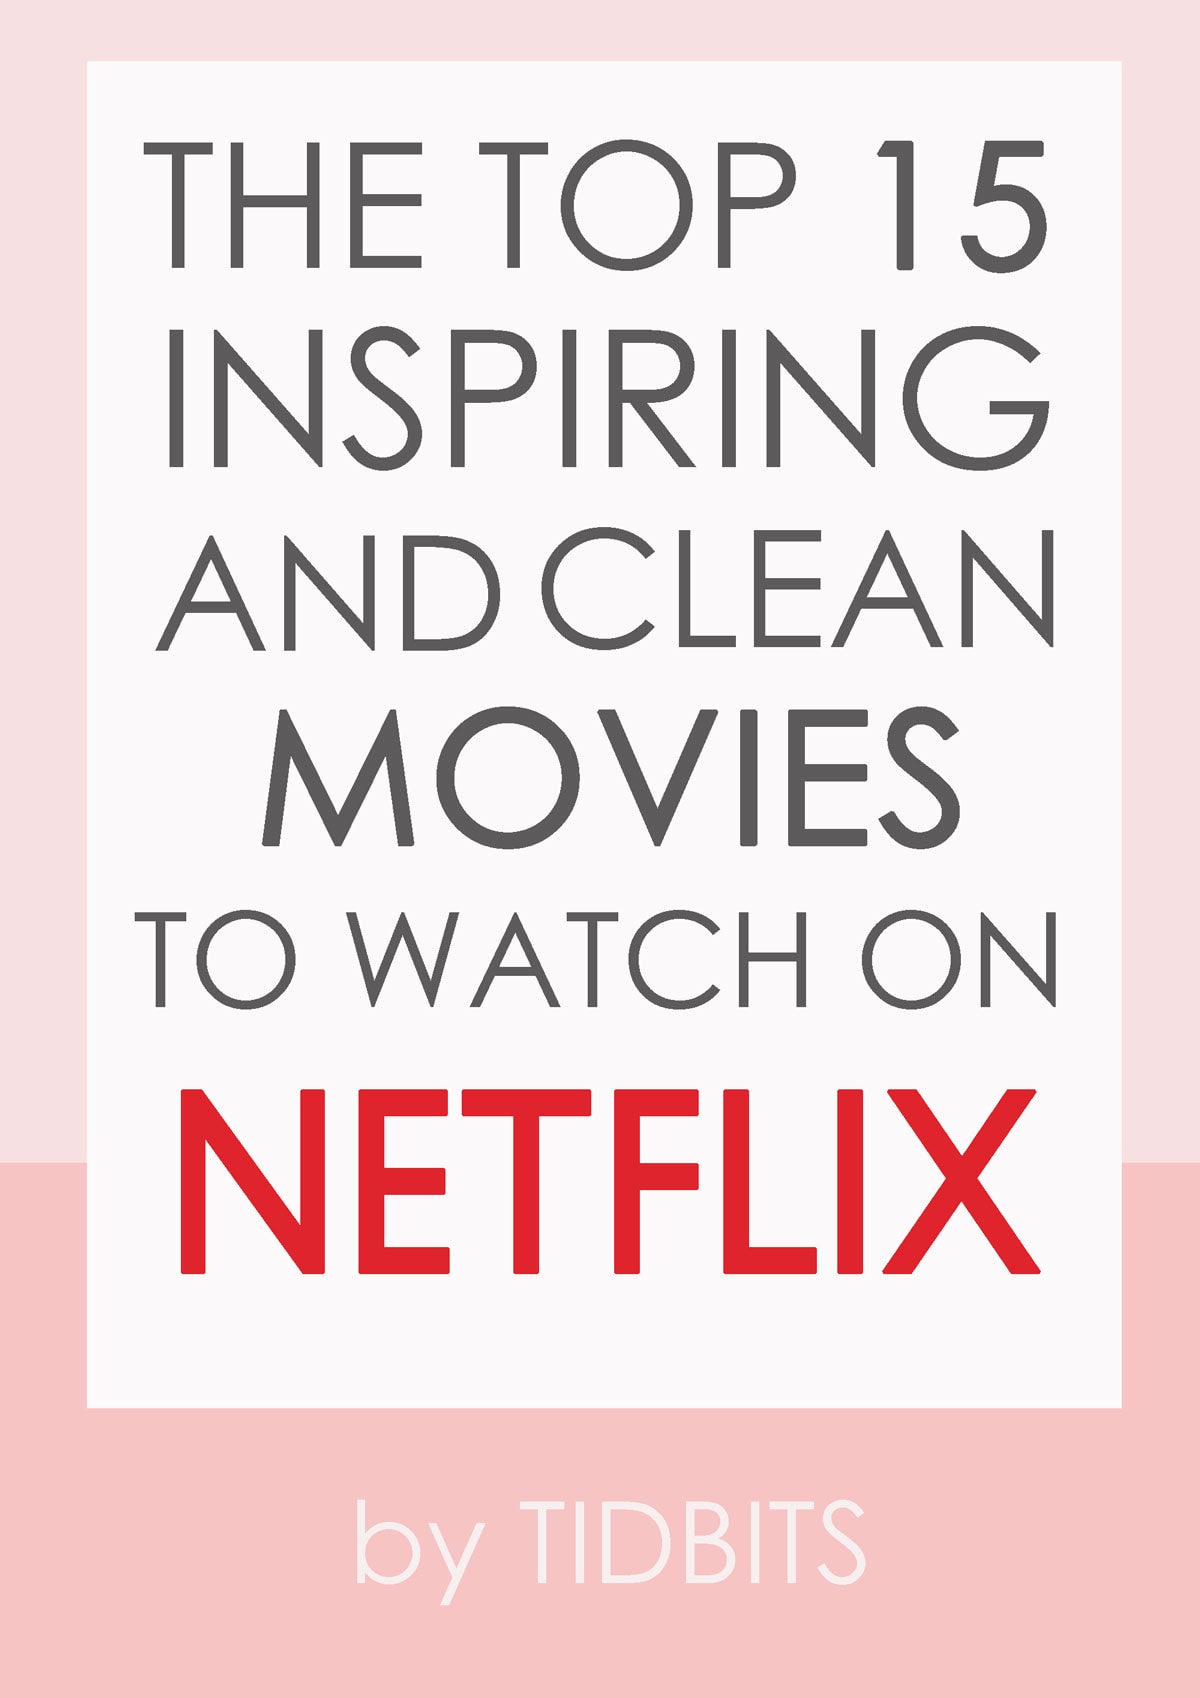 The Top 15 Inspiring Clean Movies to Watch on Netflix.